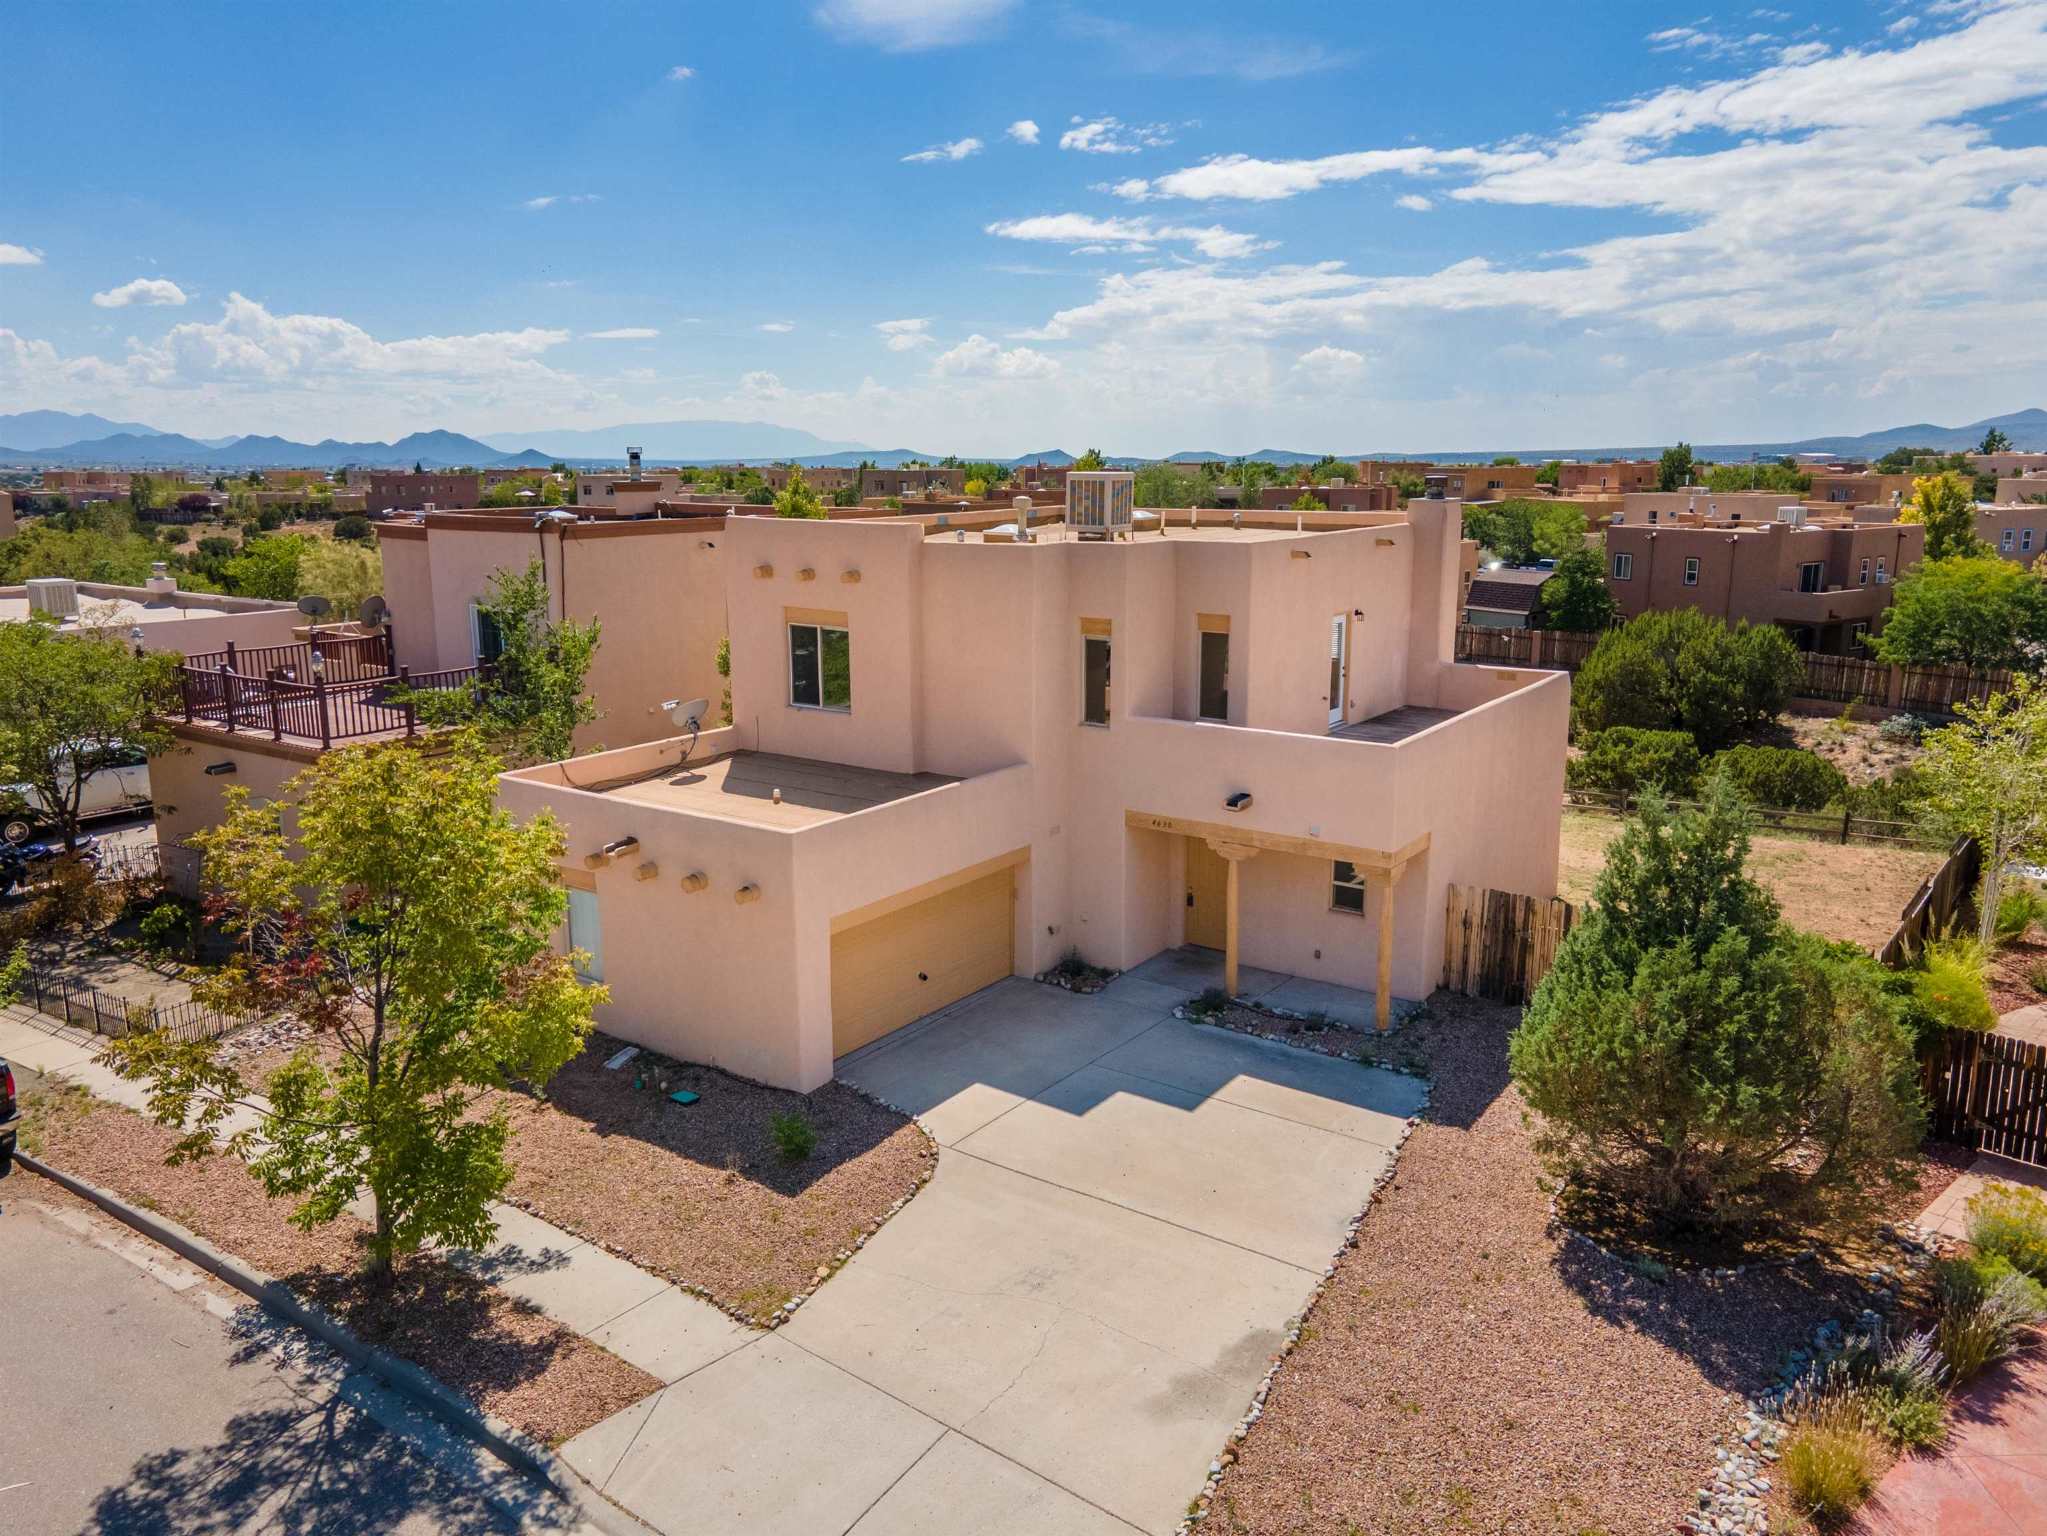 4630 SUNSET, Santa Fe, New Mexico 87507, 4 Bedrooms Bedrooms, ,3 BathroomsBathrooms,Residential,For Sale,4630 SUNSET,202104010